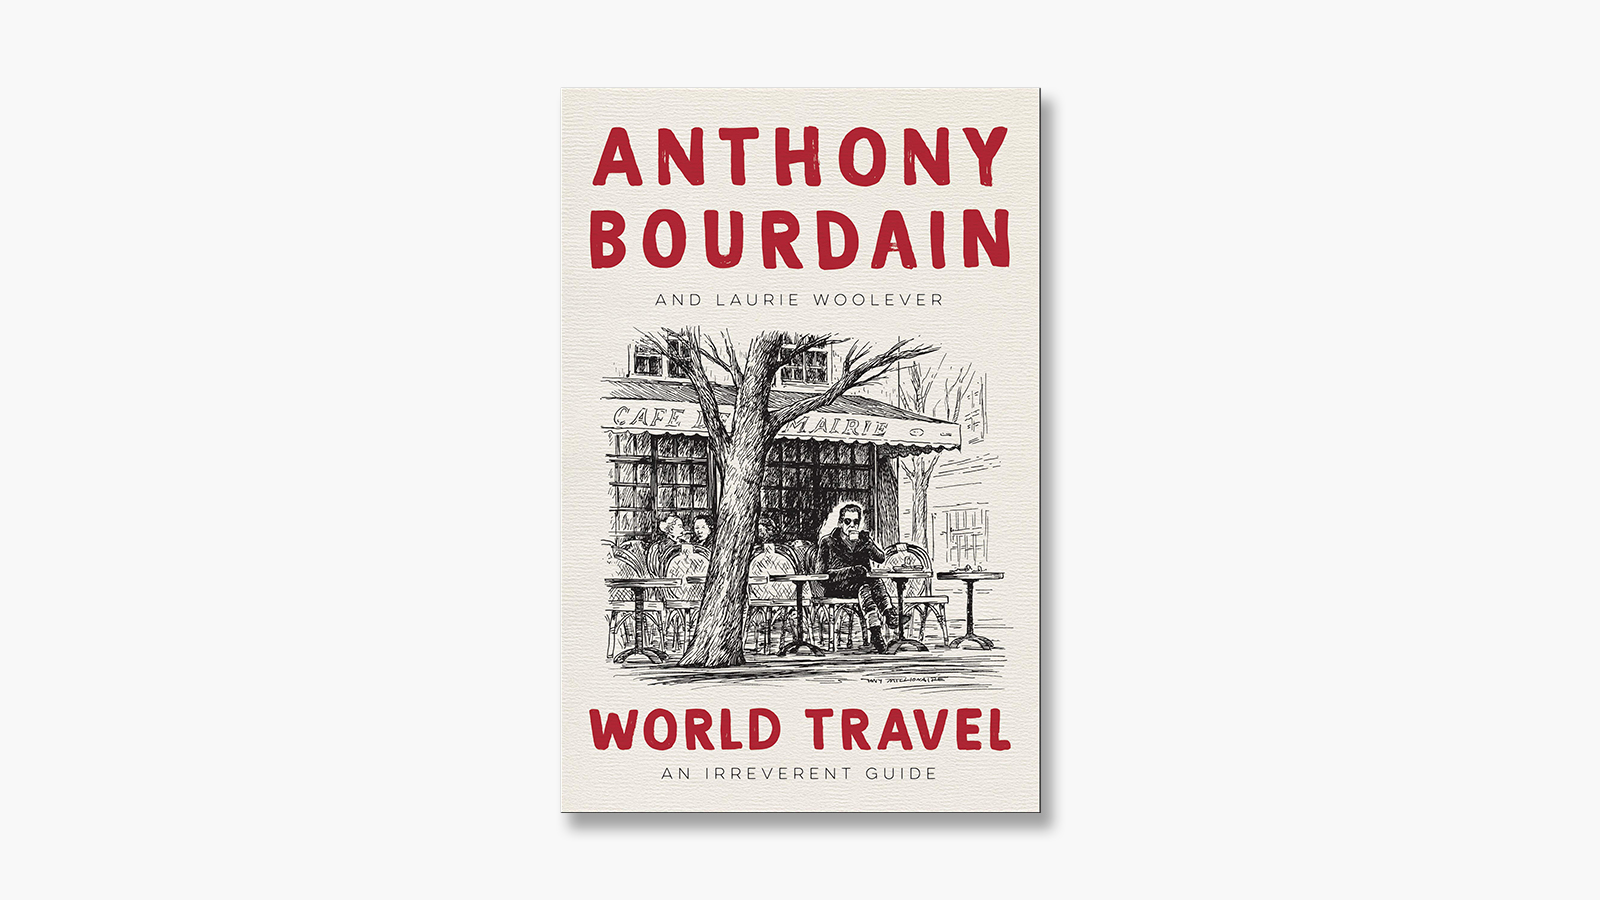 ‘World Travel: An Irreverent Guide’ by Anthony Bourdain & Laurie Woolever